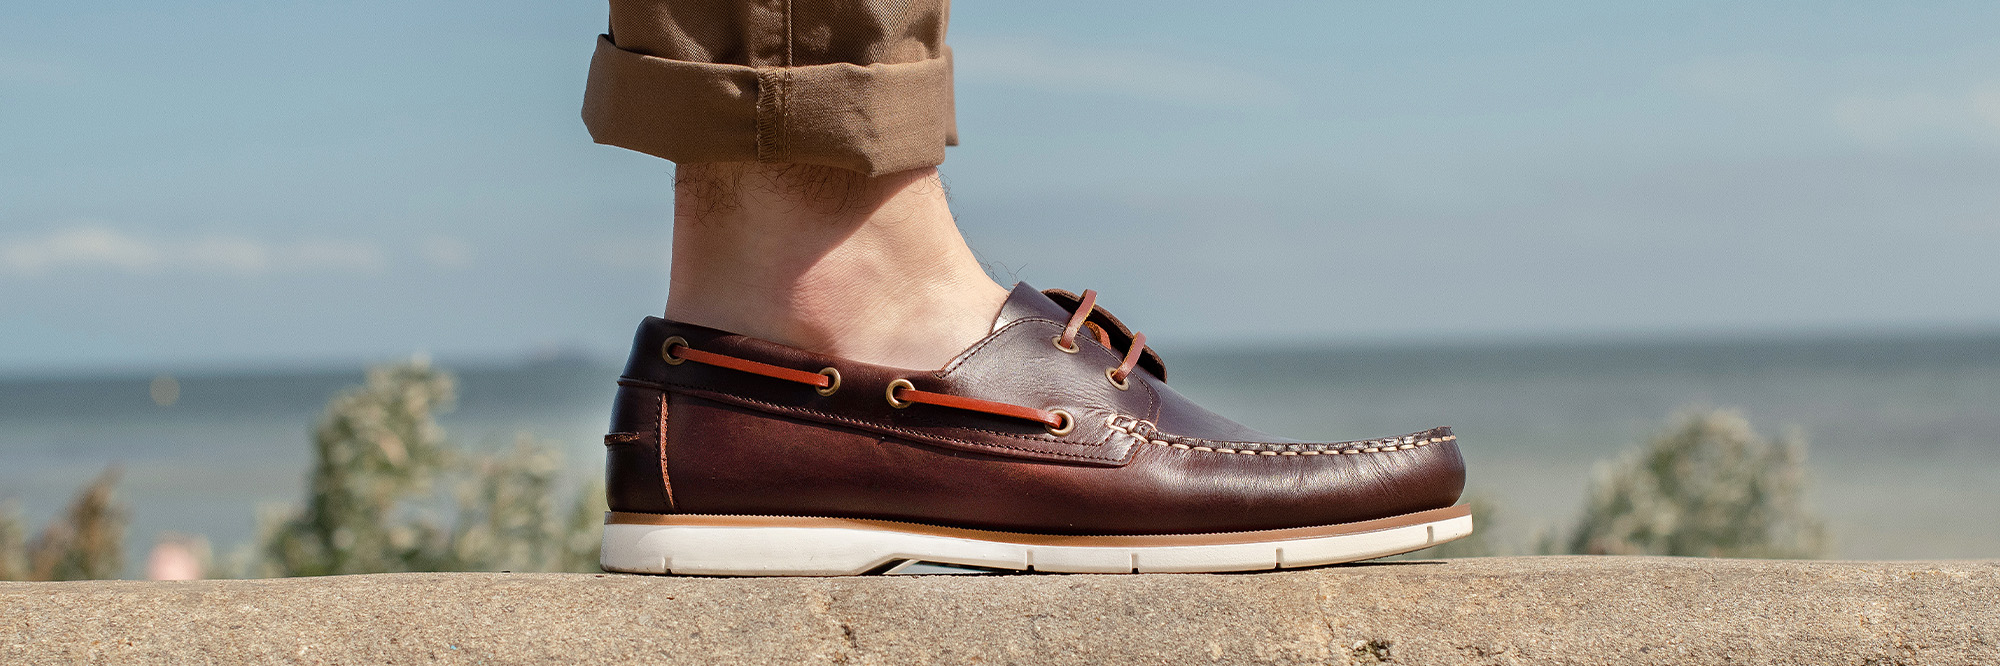 Brown Leather Boat Shoes with Linen Pants Outfits (3 ideas & outfits)